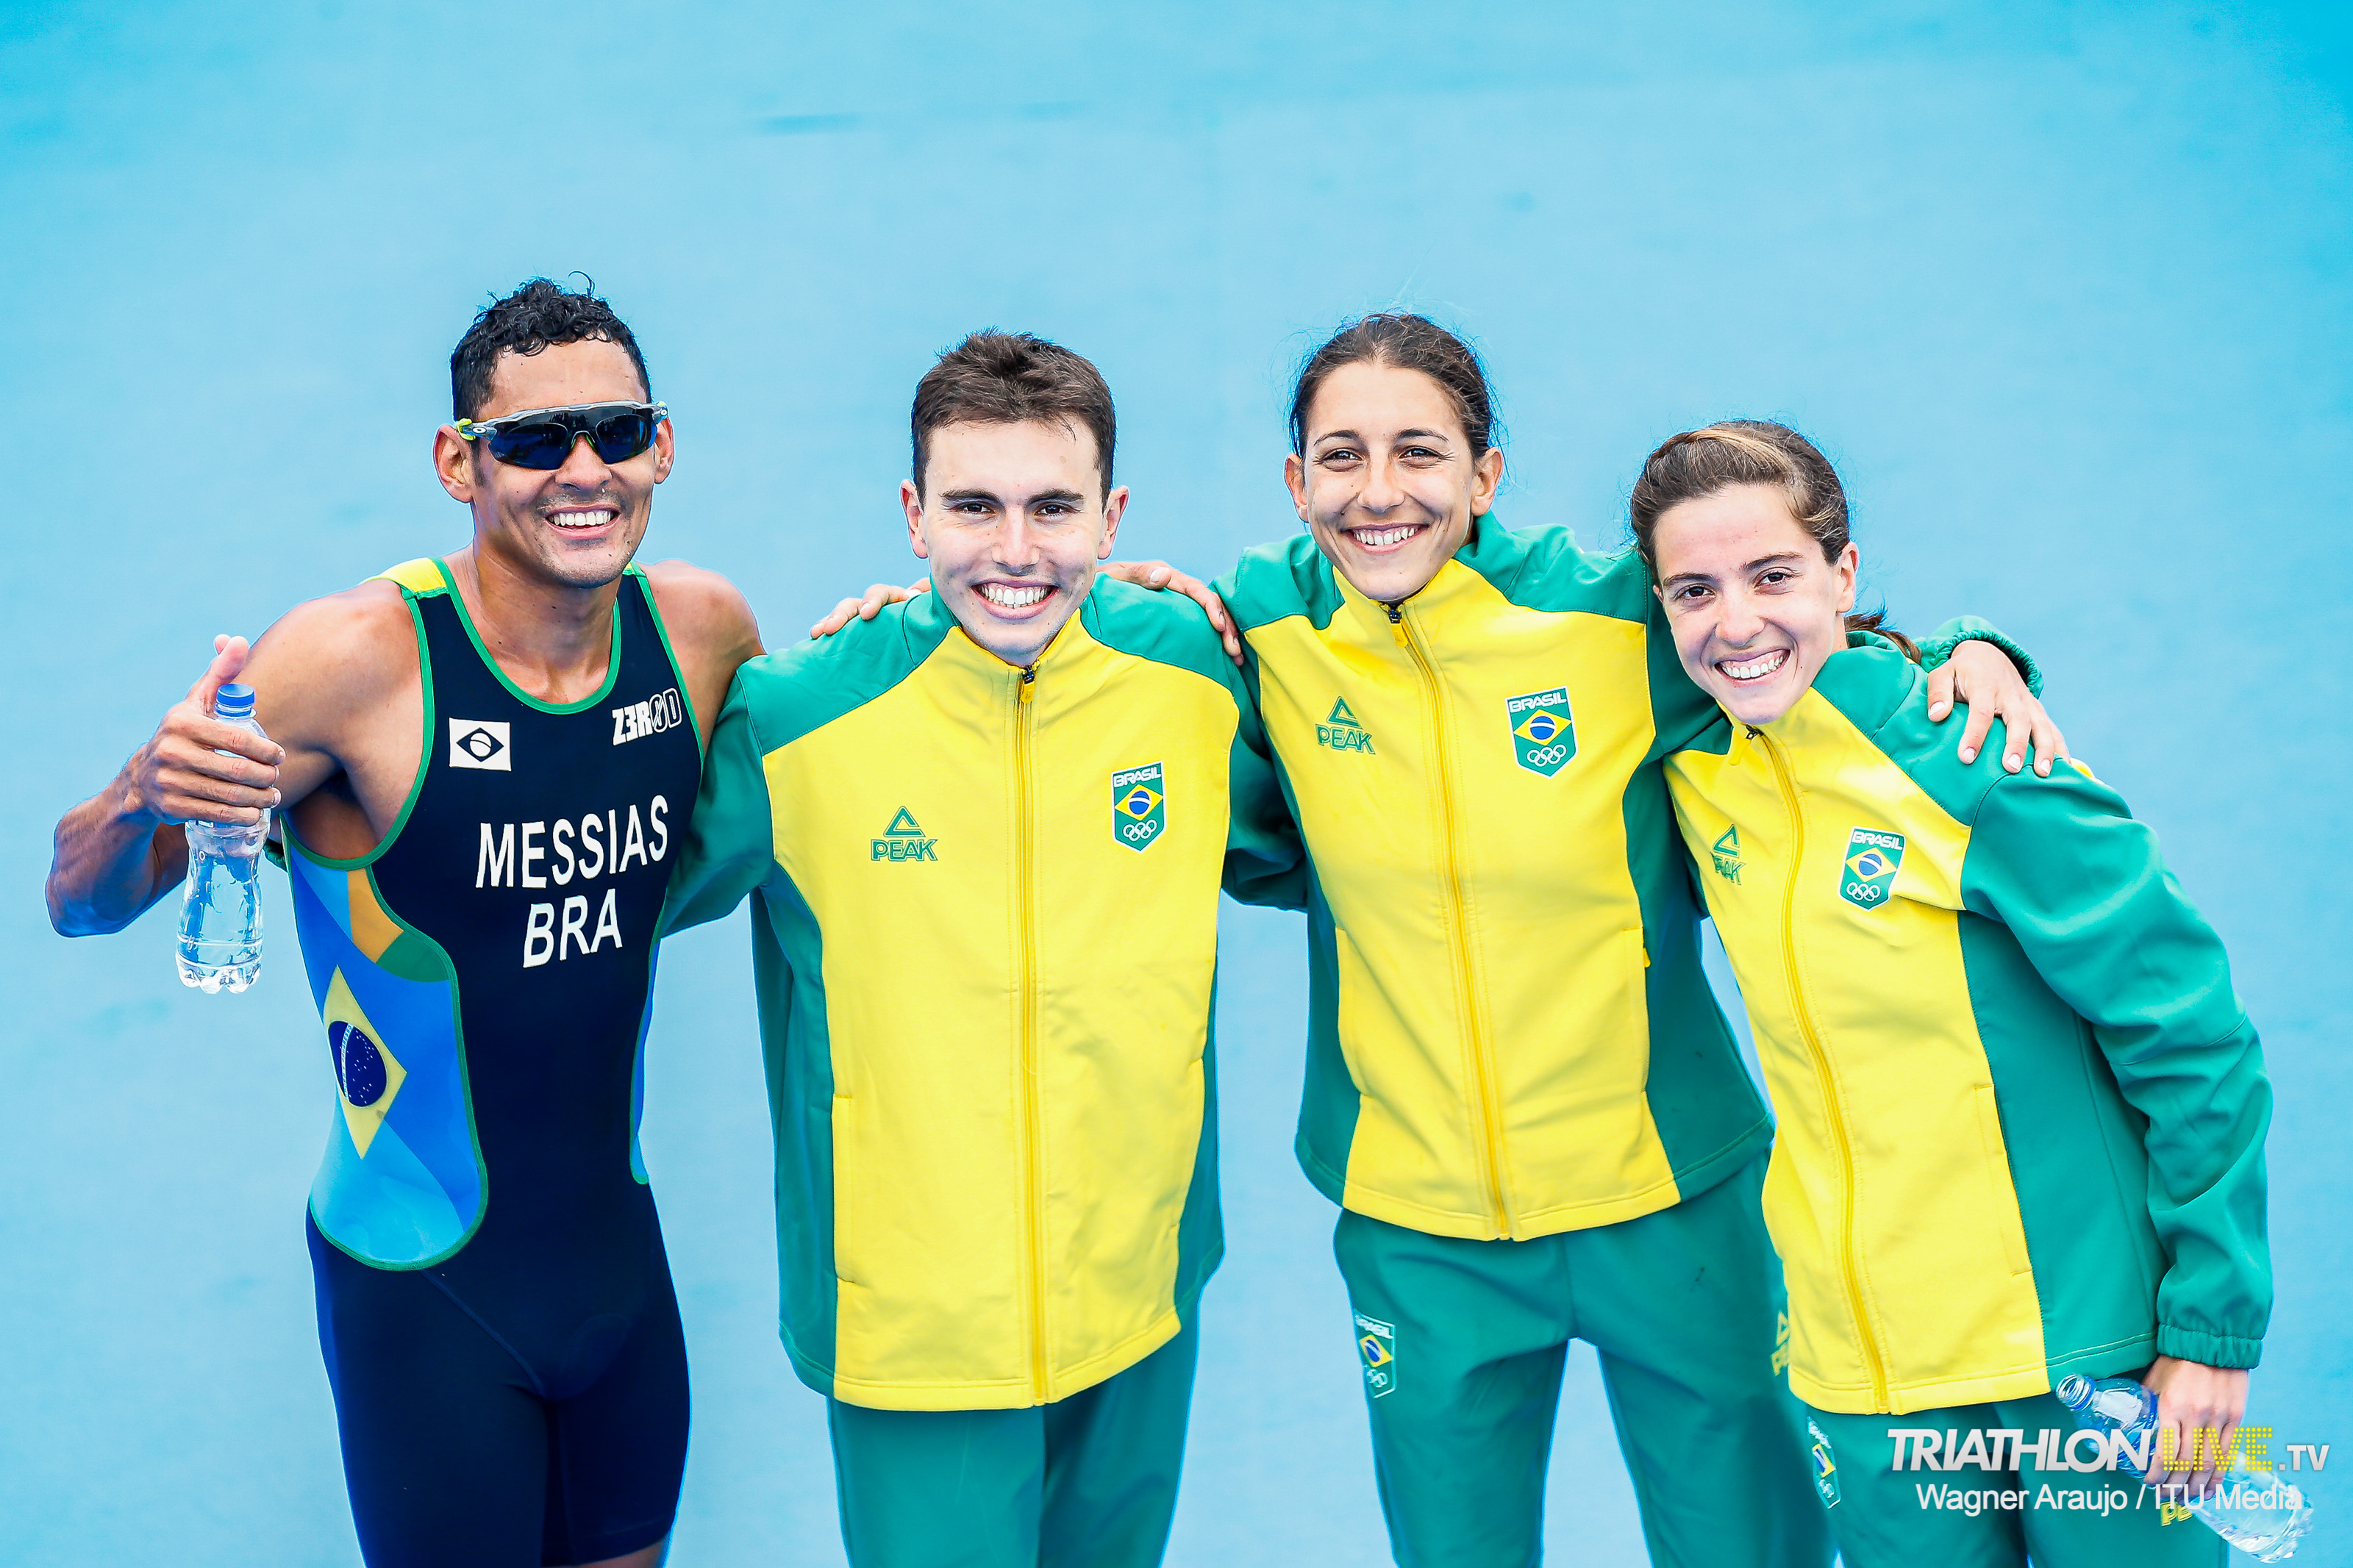 Brazil delivers mixed relay gold in the Pan American Games • World Triathlon